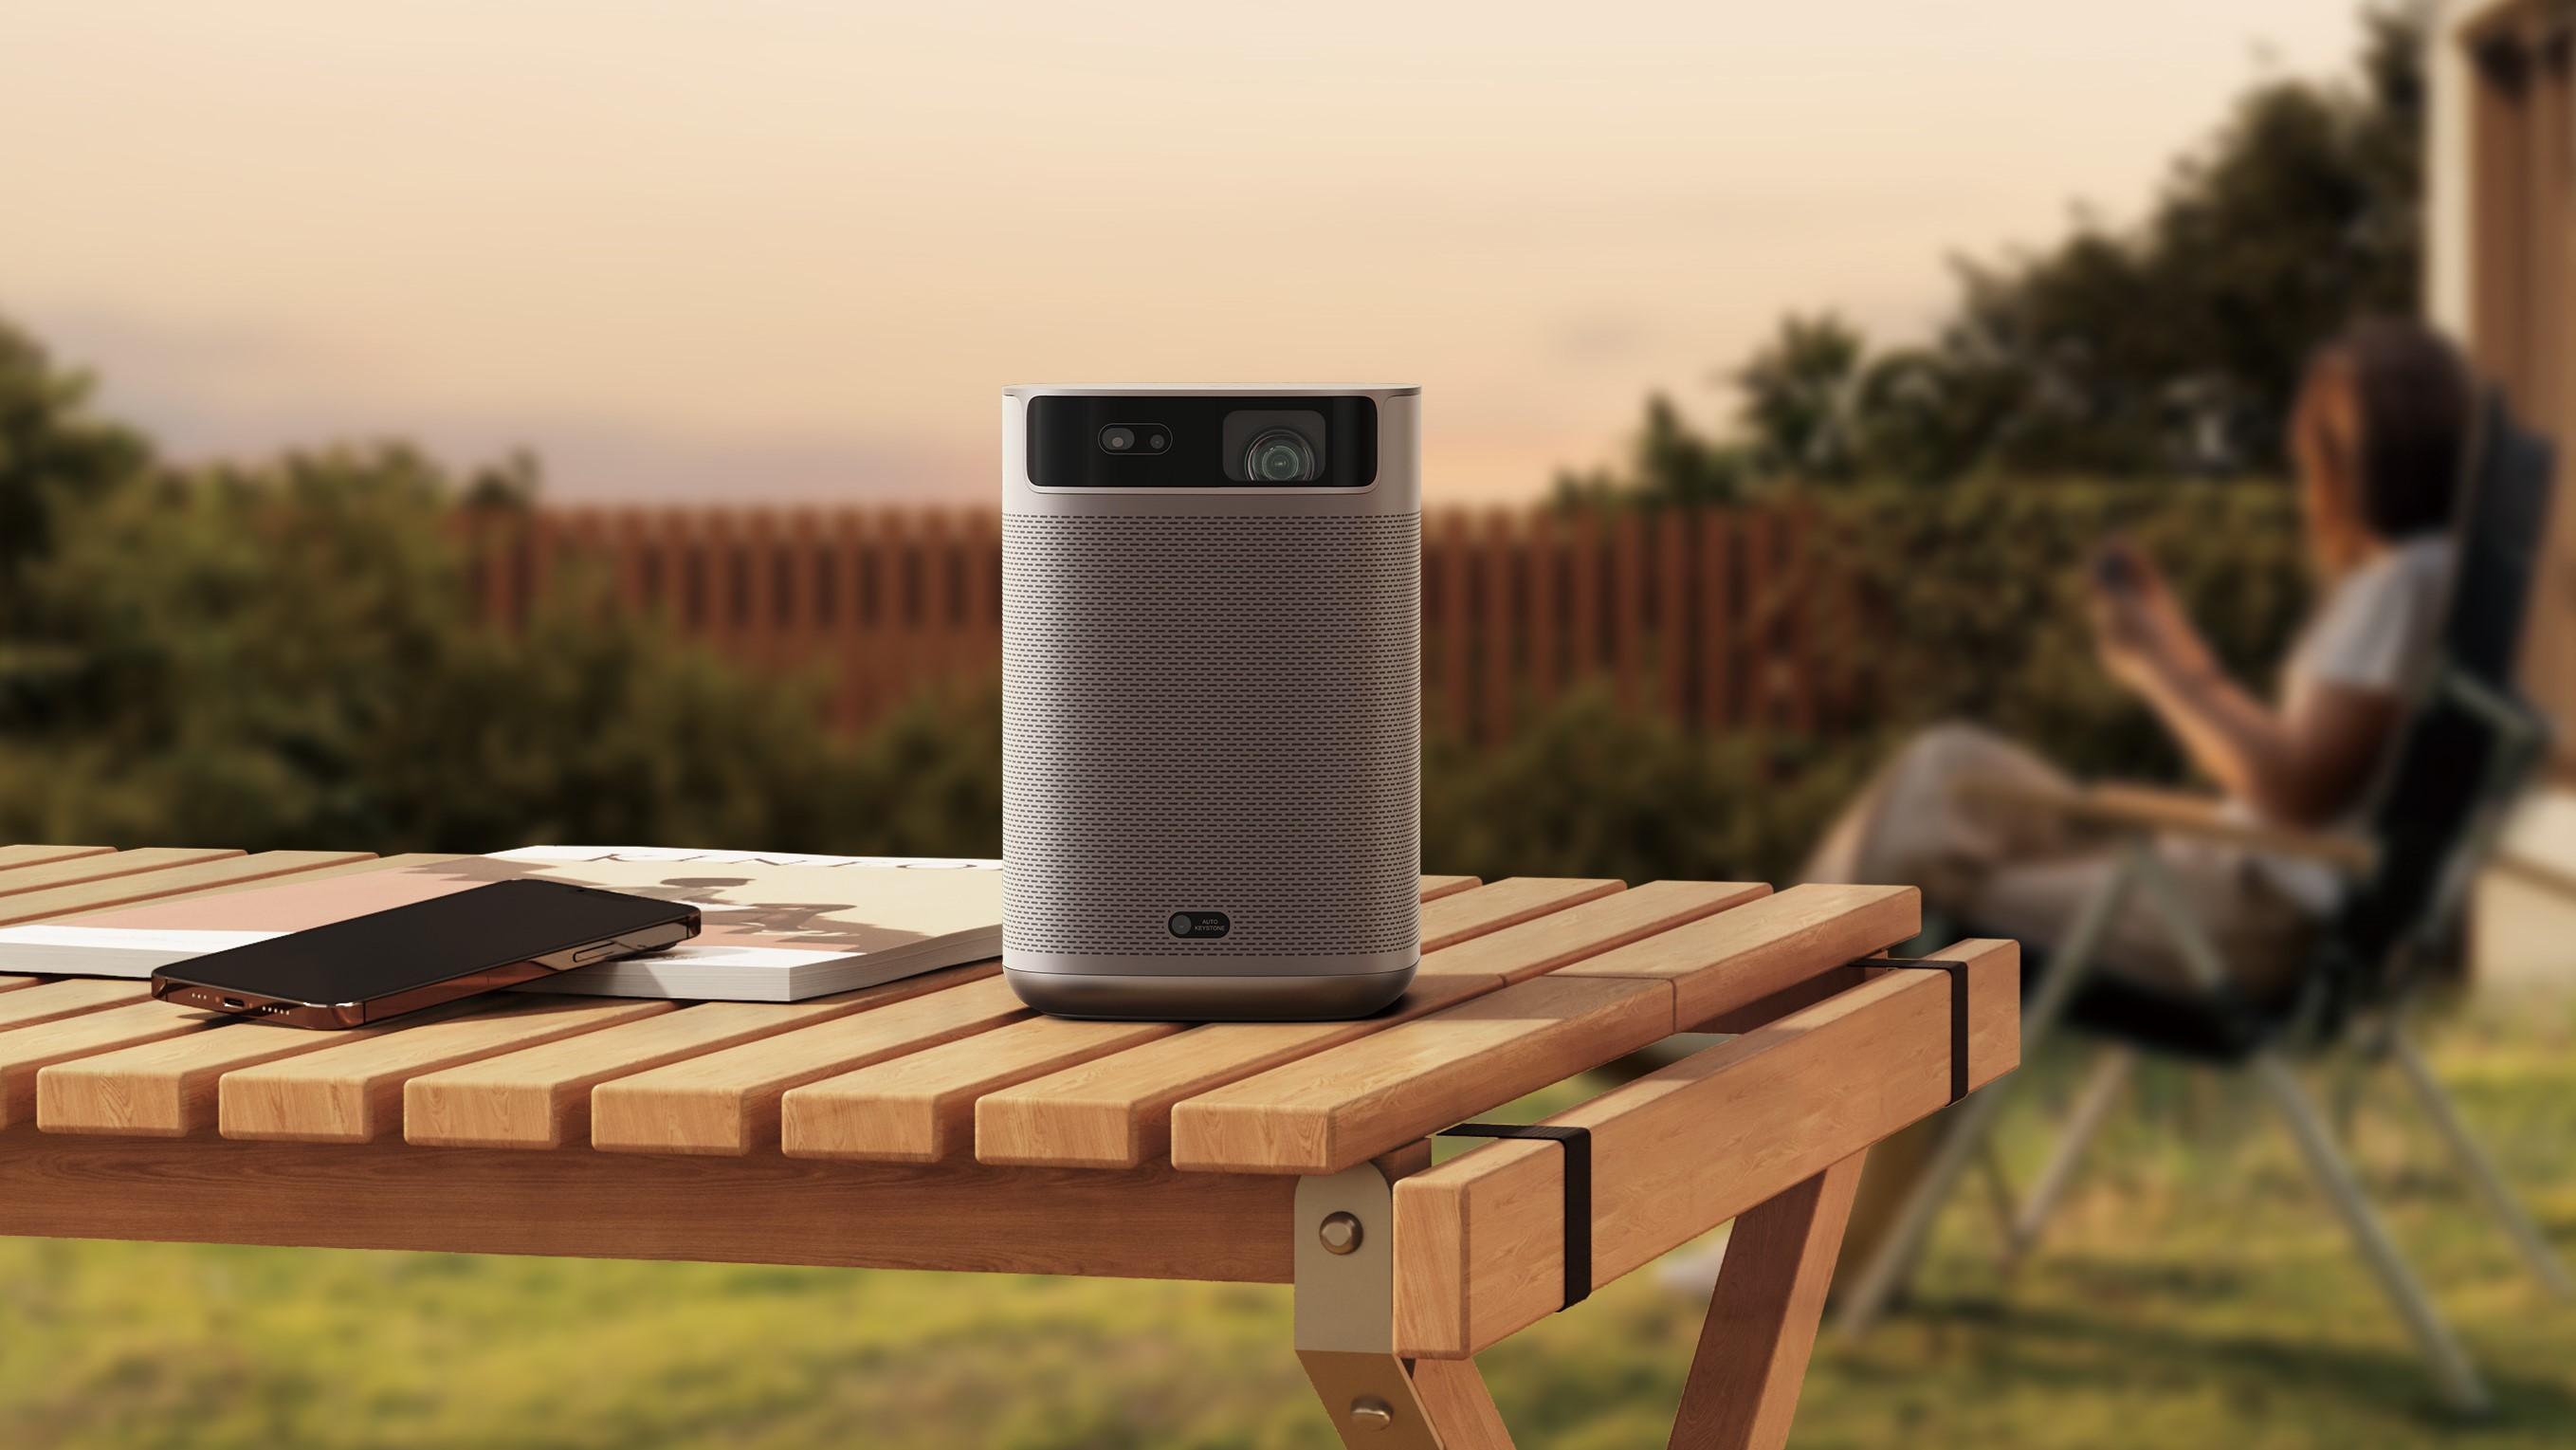 XGIMI MoGo 2 Pro on an outdoor table with trees in the background